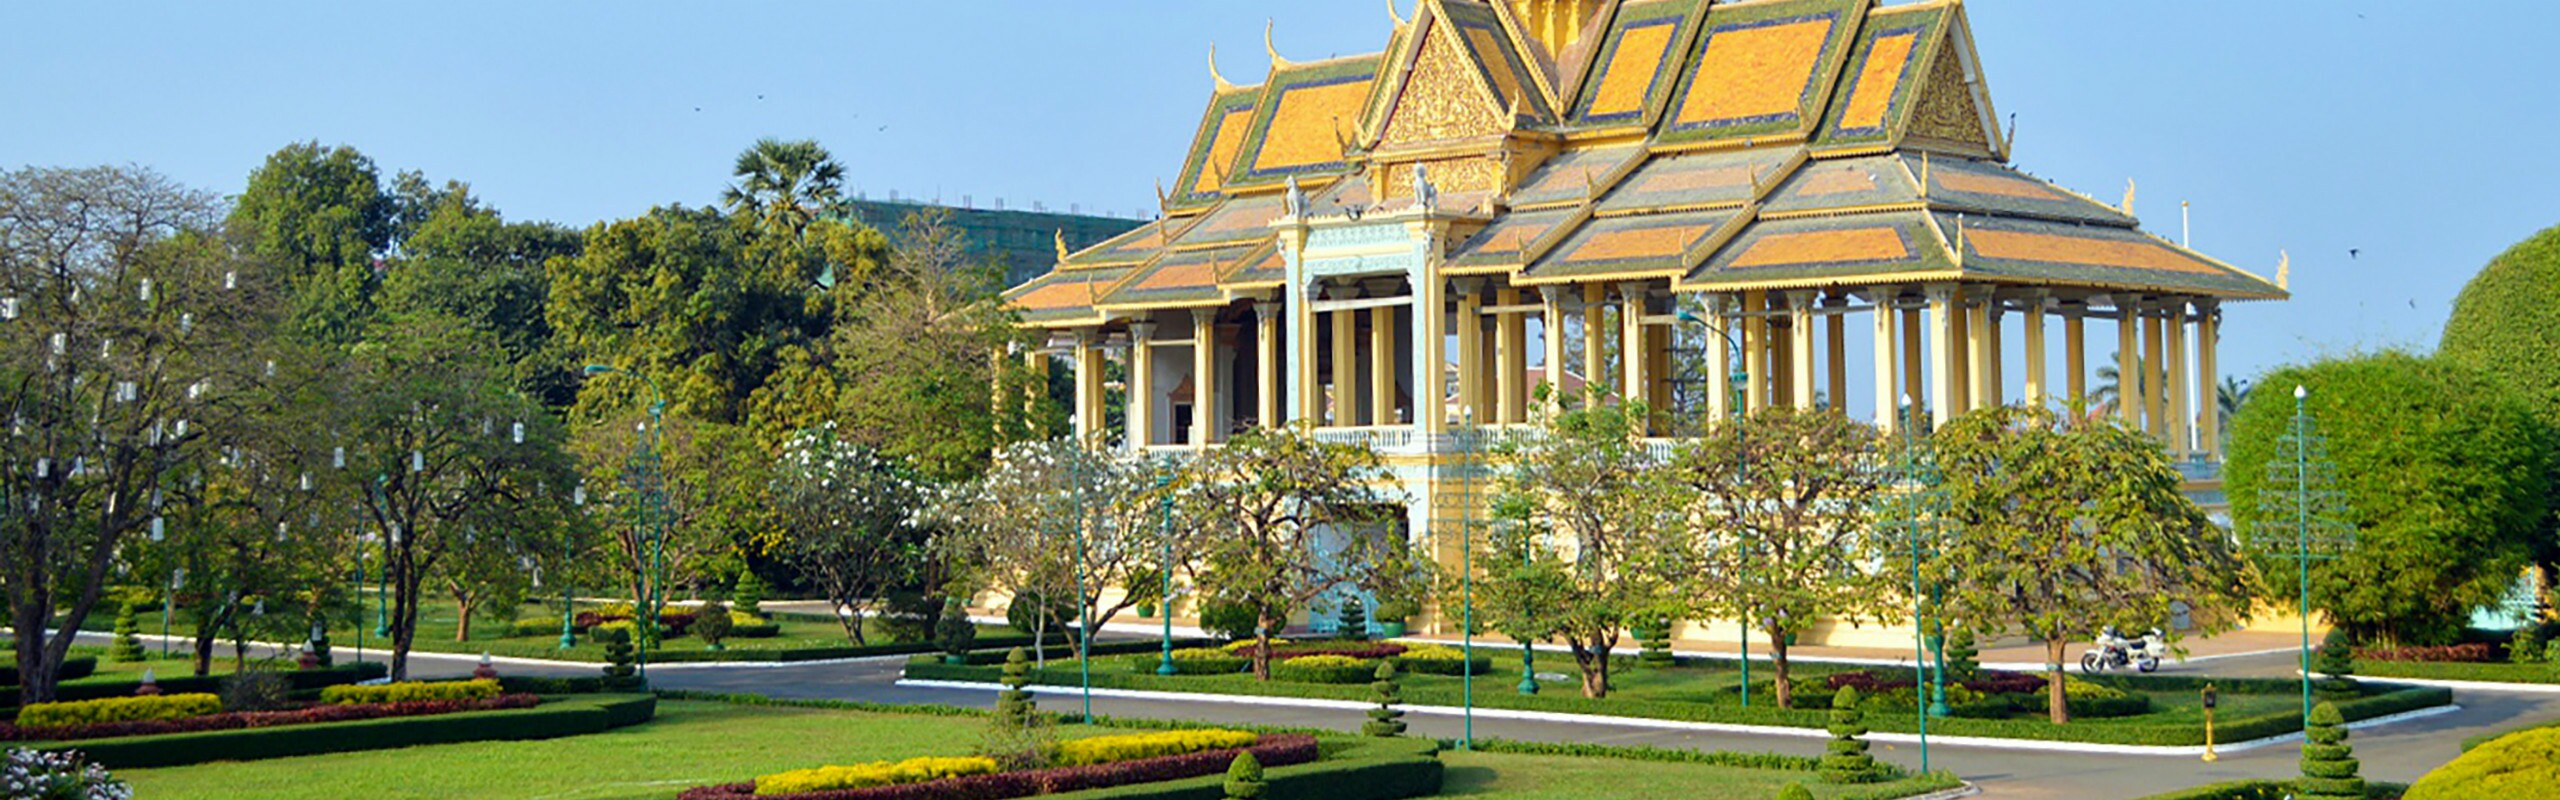 Top 5 Cambodia Gateway Cities, Best Way in and Out of Cambodia